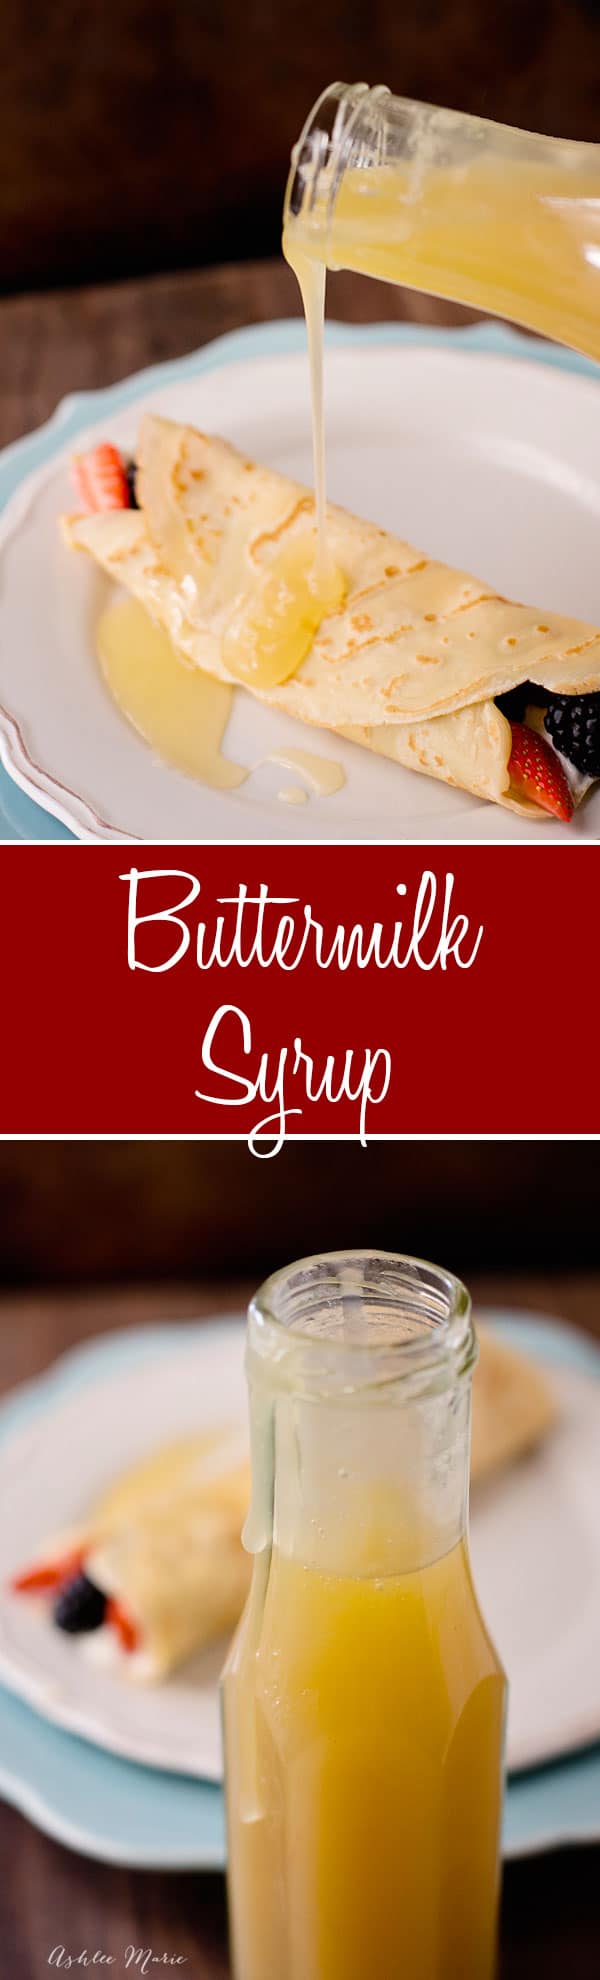 simple to make and delicious, this buttermilk syrup is always a huge hit